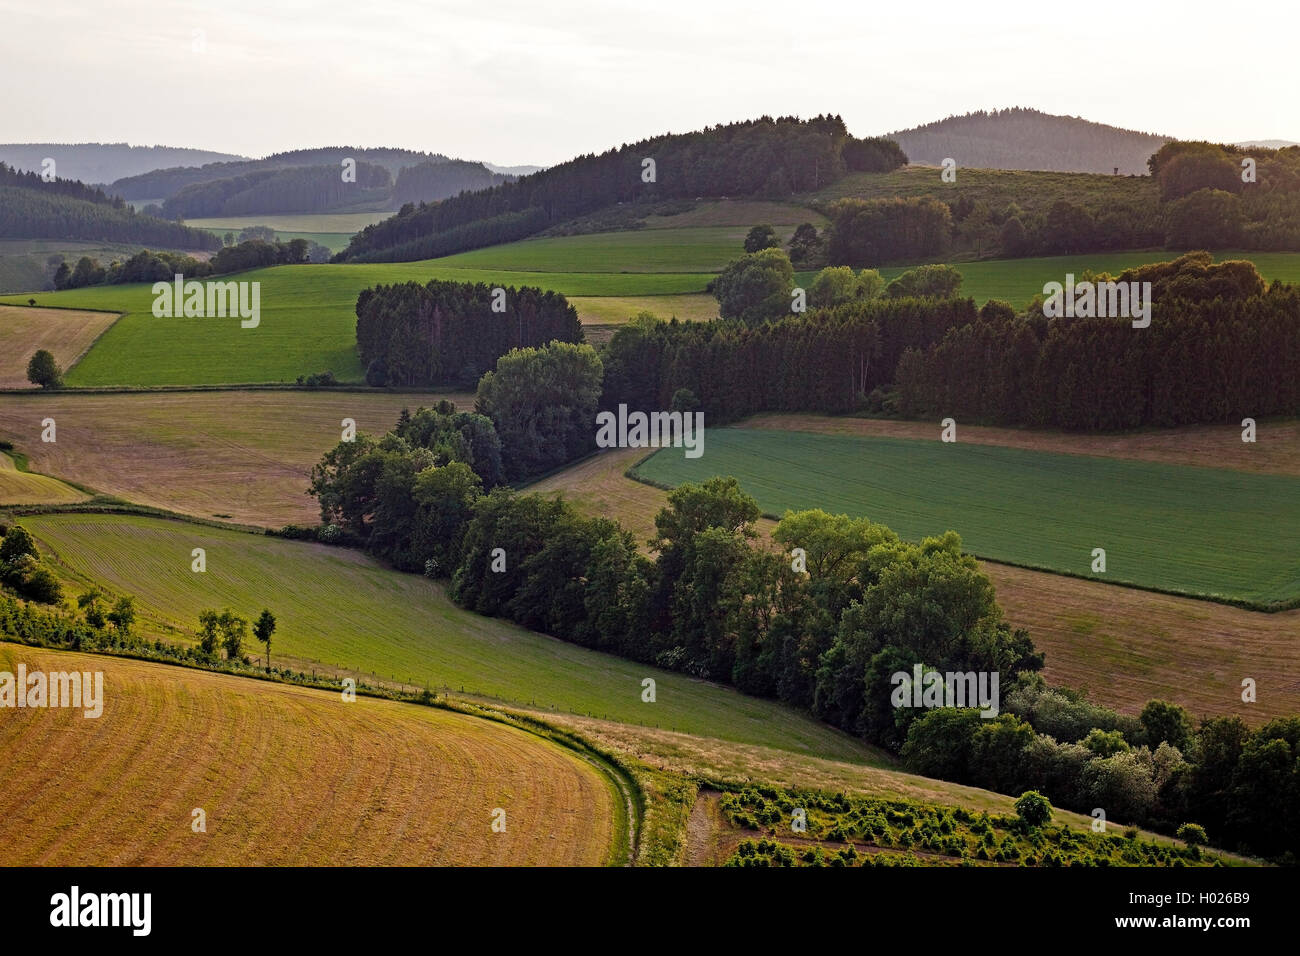 aerial view of hilly field and forest landscape near Menkhausen, Germany, North Rhine-Westphalia, Sauerland, Schmallenberg Stock Photo